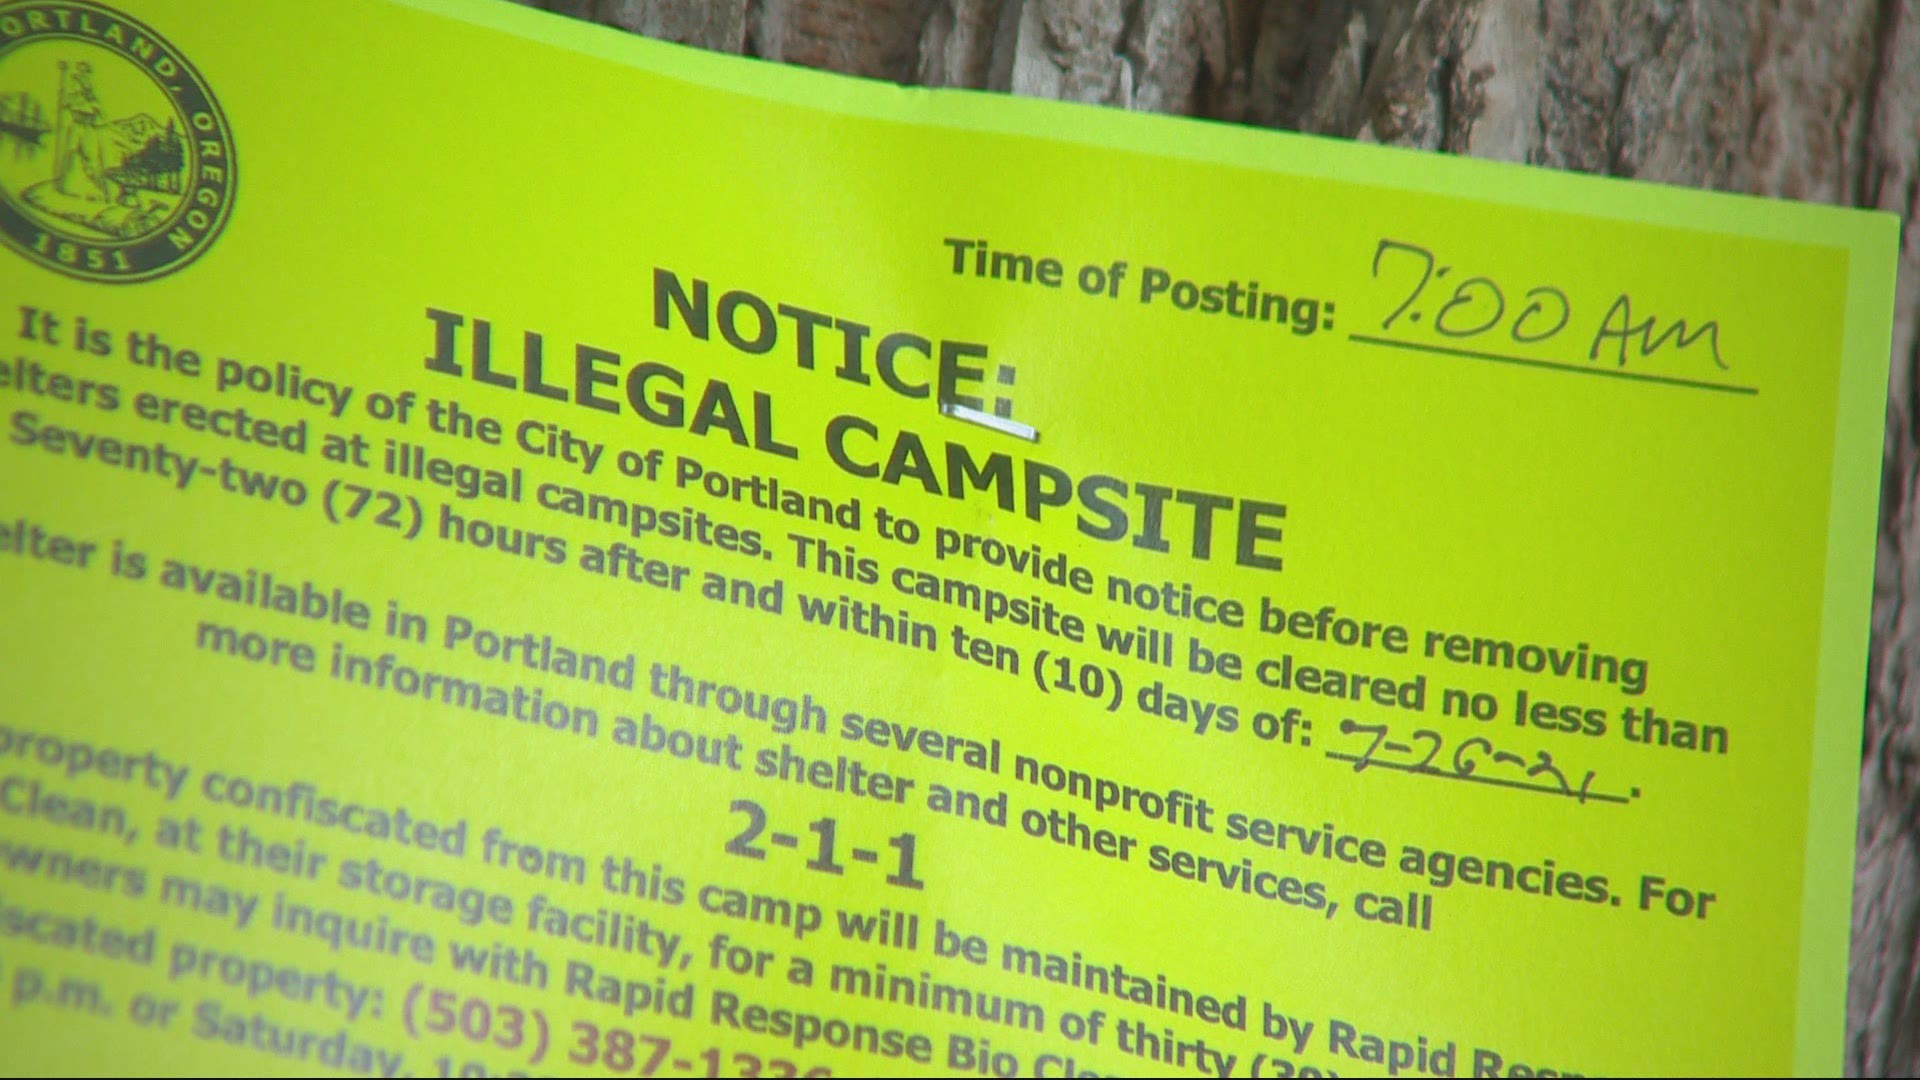 After months of buildup, the city of Portland is giving homeless campers around Laurelhurst Park 72 hours to pack up and leave.